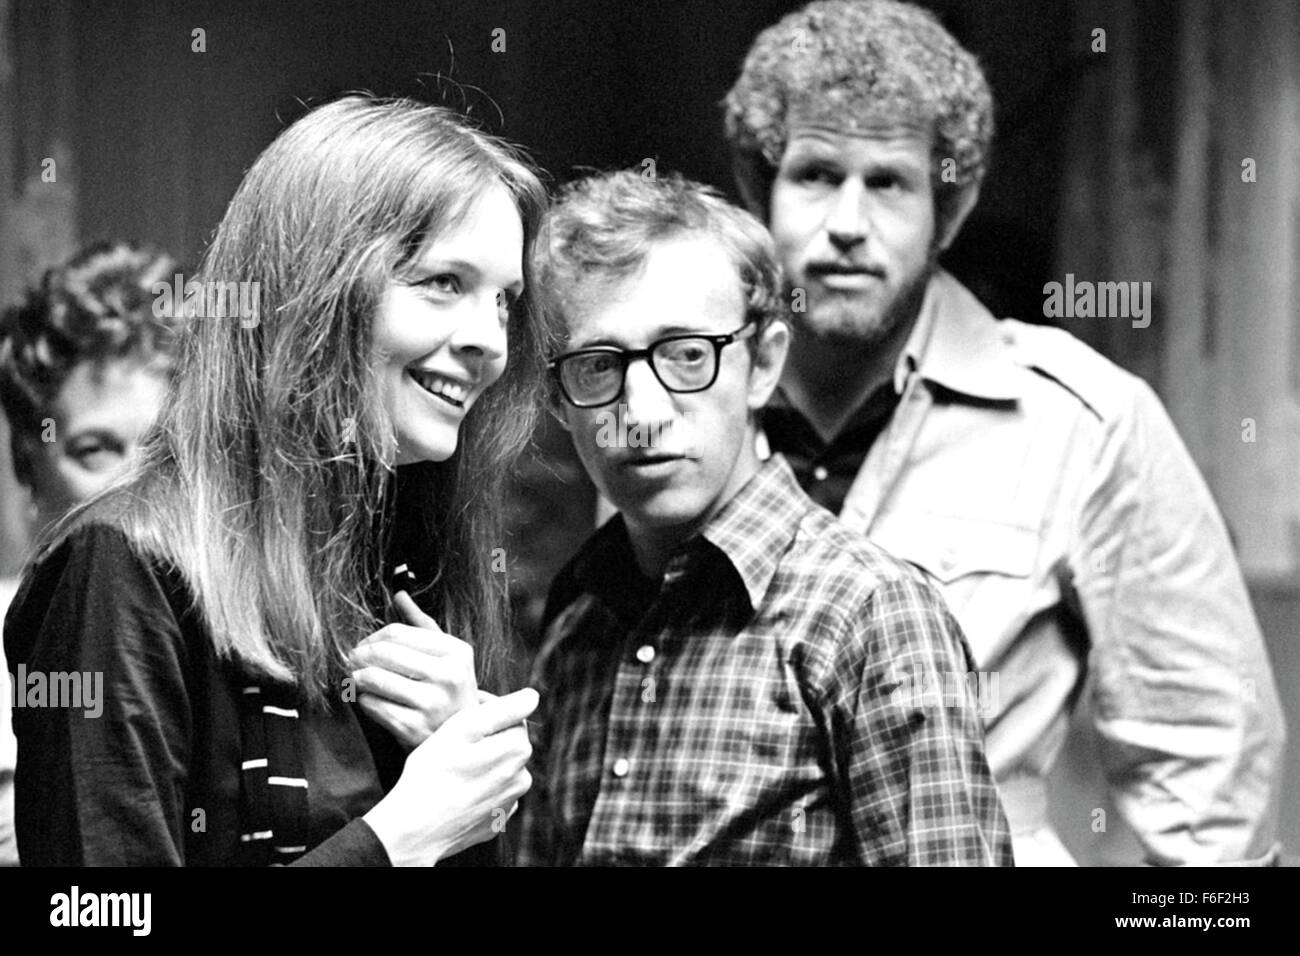 RELEASE DATE: April 20,1977 TITLE: Annie Hall. STUDIO: United Artists PLOT: After breaking up with his girlfriend Annie Hall (Diane Keaton), neurotic comedian Alvy Singer (Woody Allen) goes on a stream of conciousness journey through his memories of their relationship, trying to find out what caused them to part ways. The film features innovative elements including cartoon segments, flashbacks, and even breaking the 'fourth wall' by having characters address the camera. PICTURED: WOODY ALLEN, TONY ROBERTS, DIANE KEATON on set. Stock Photo